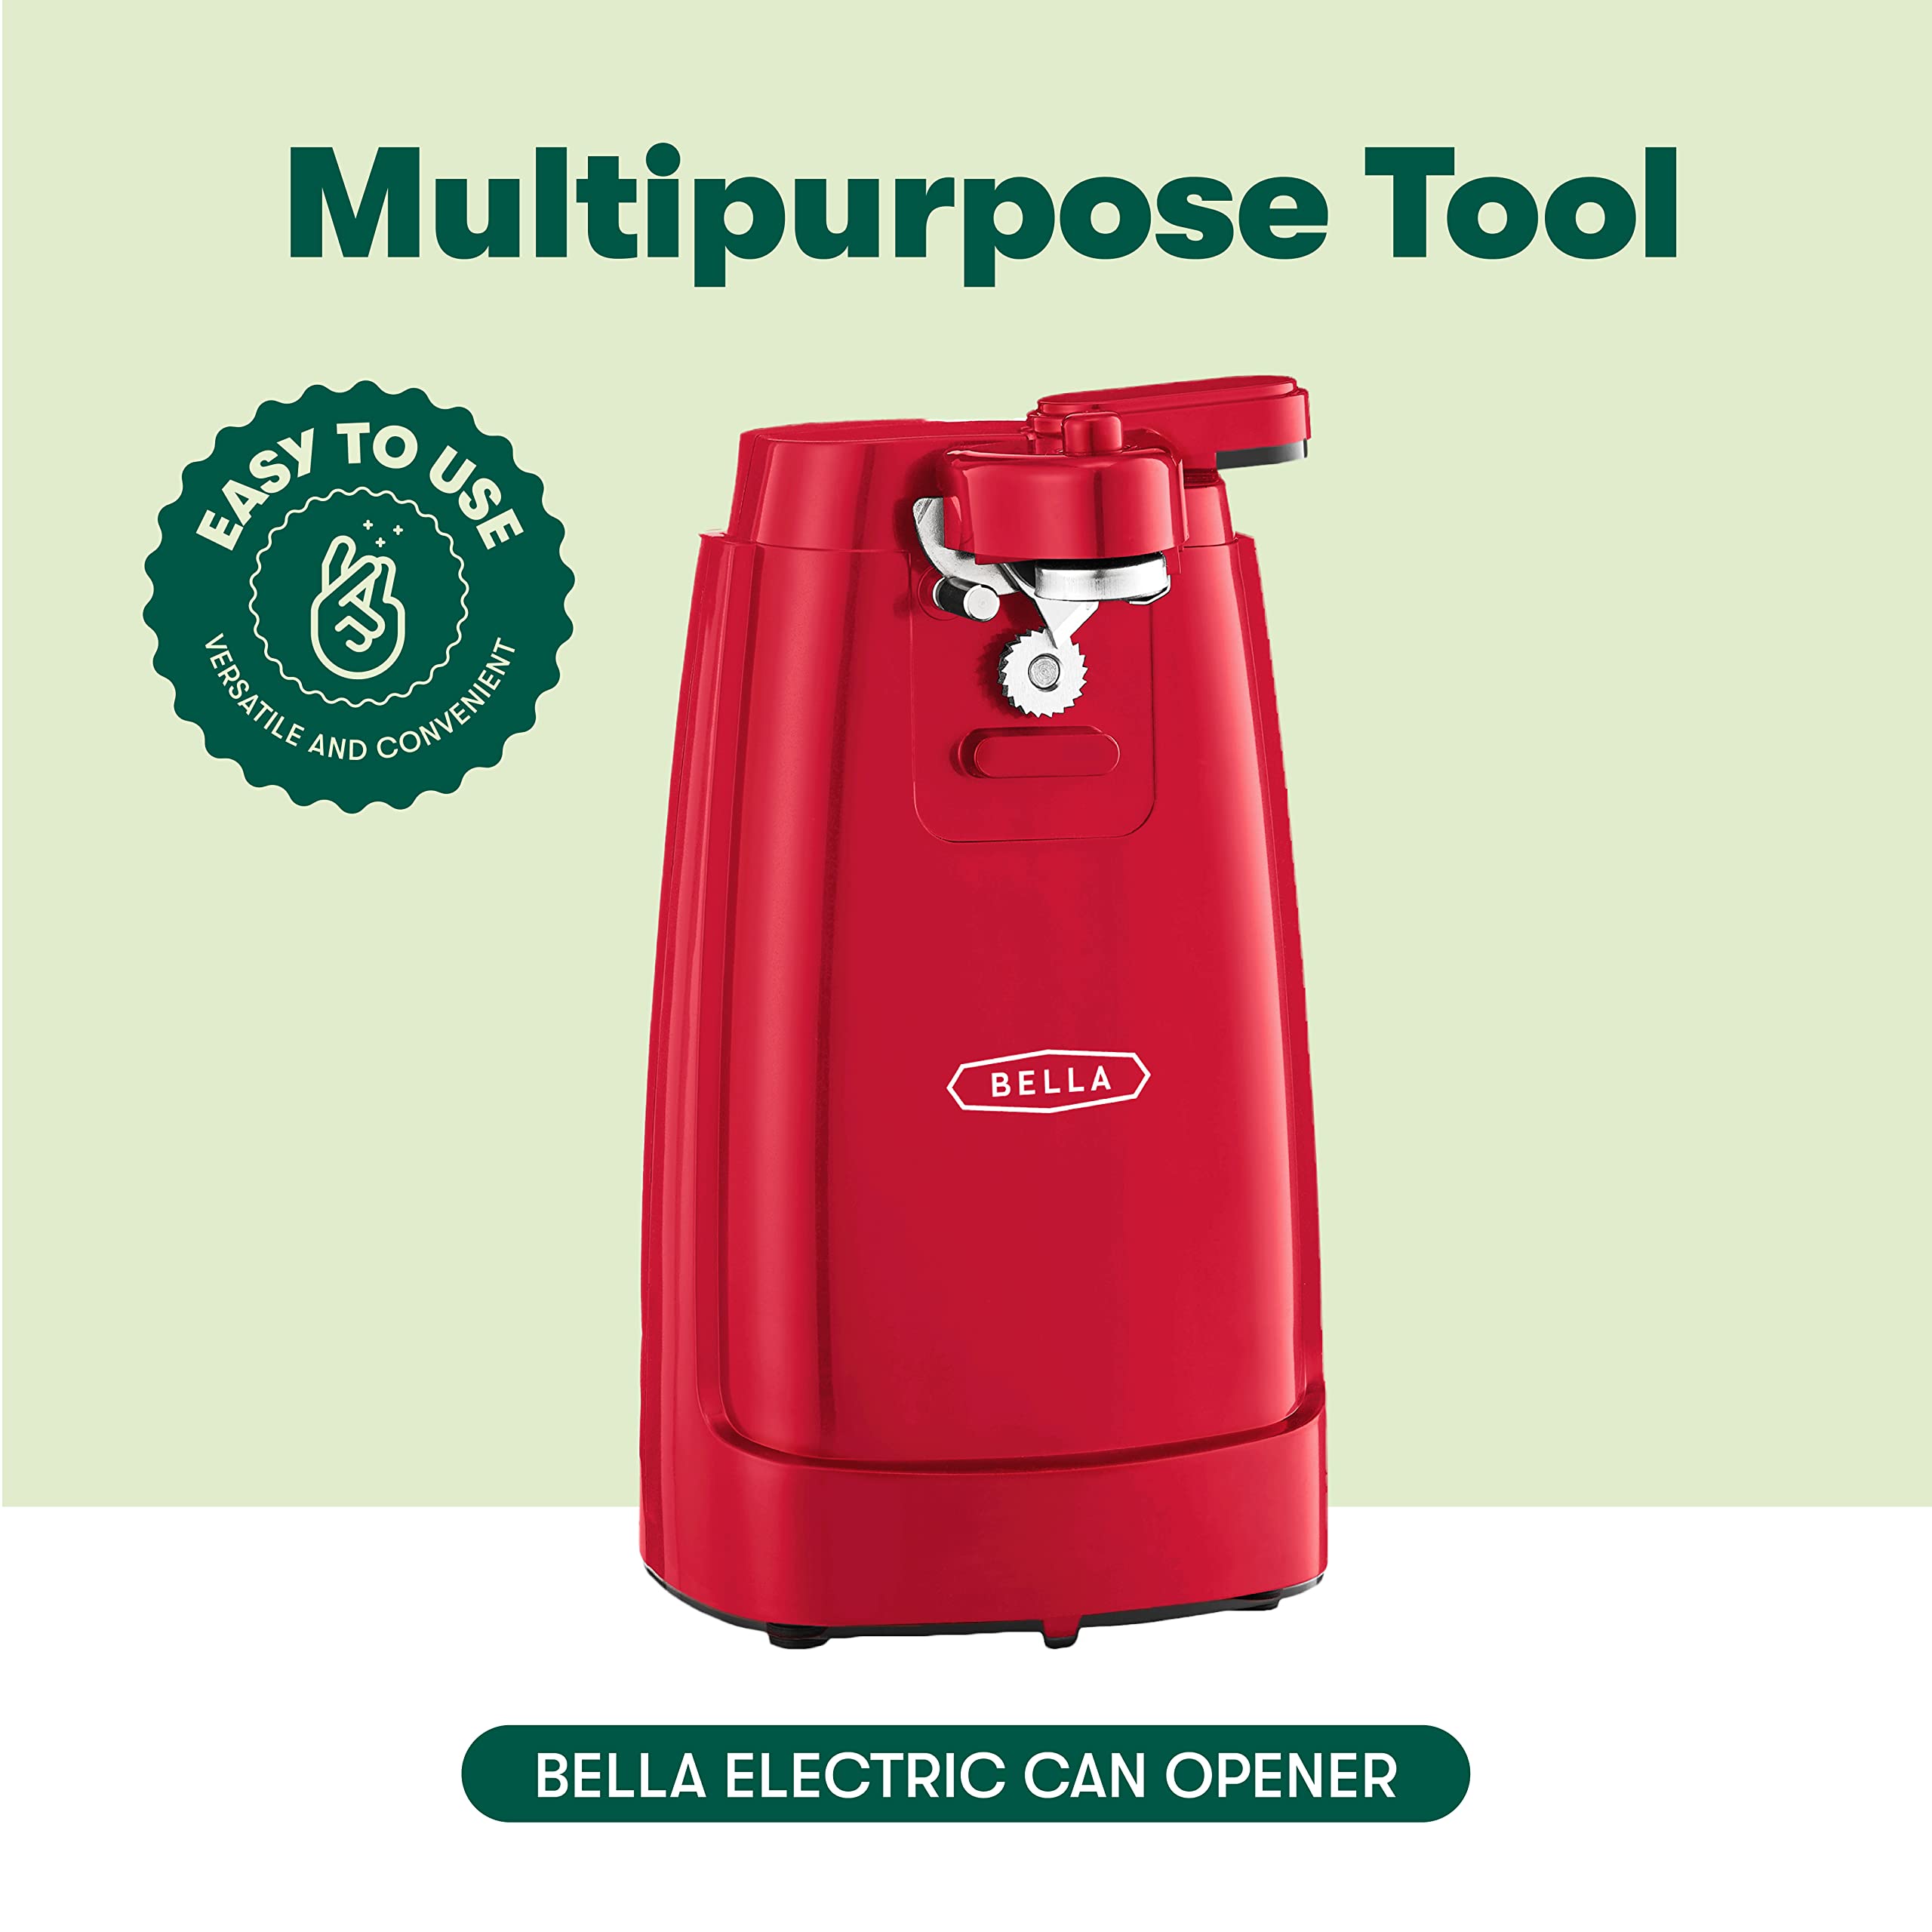 BELLA Electric Can Opener and Knife Sharpener, Multifunctional Jar and Bottle Opener with Removable Cutting Lever and Cord Storage, Stainless Steel Blade, Red